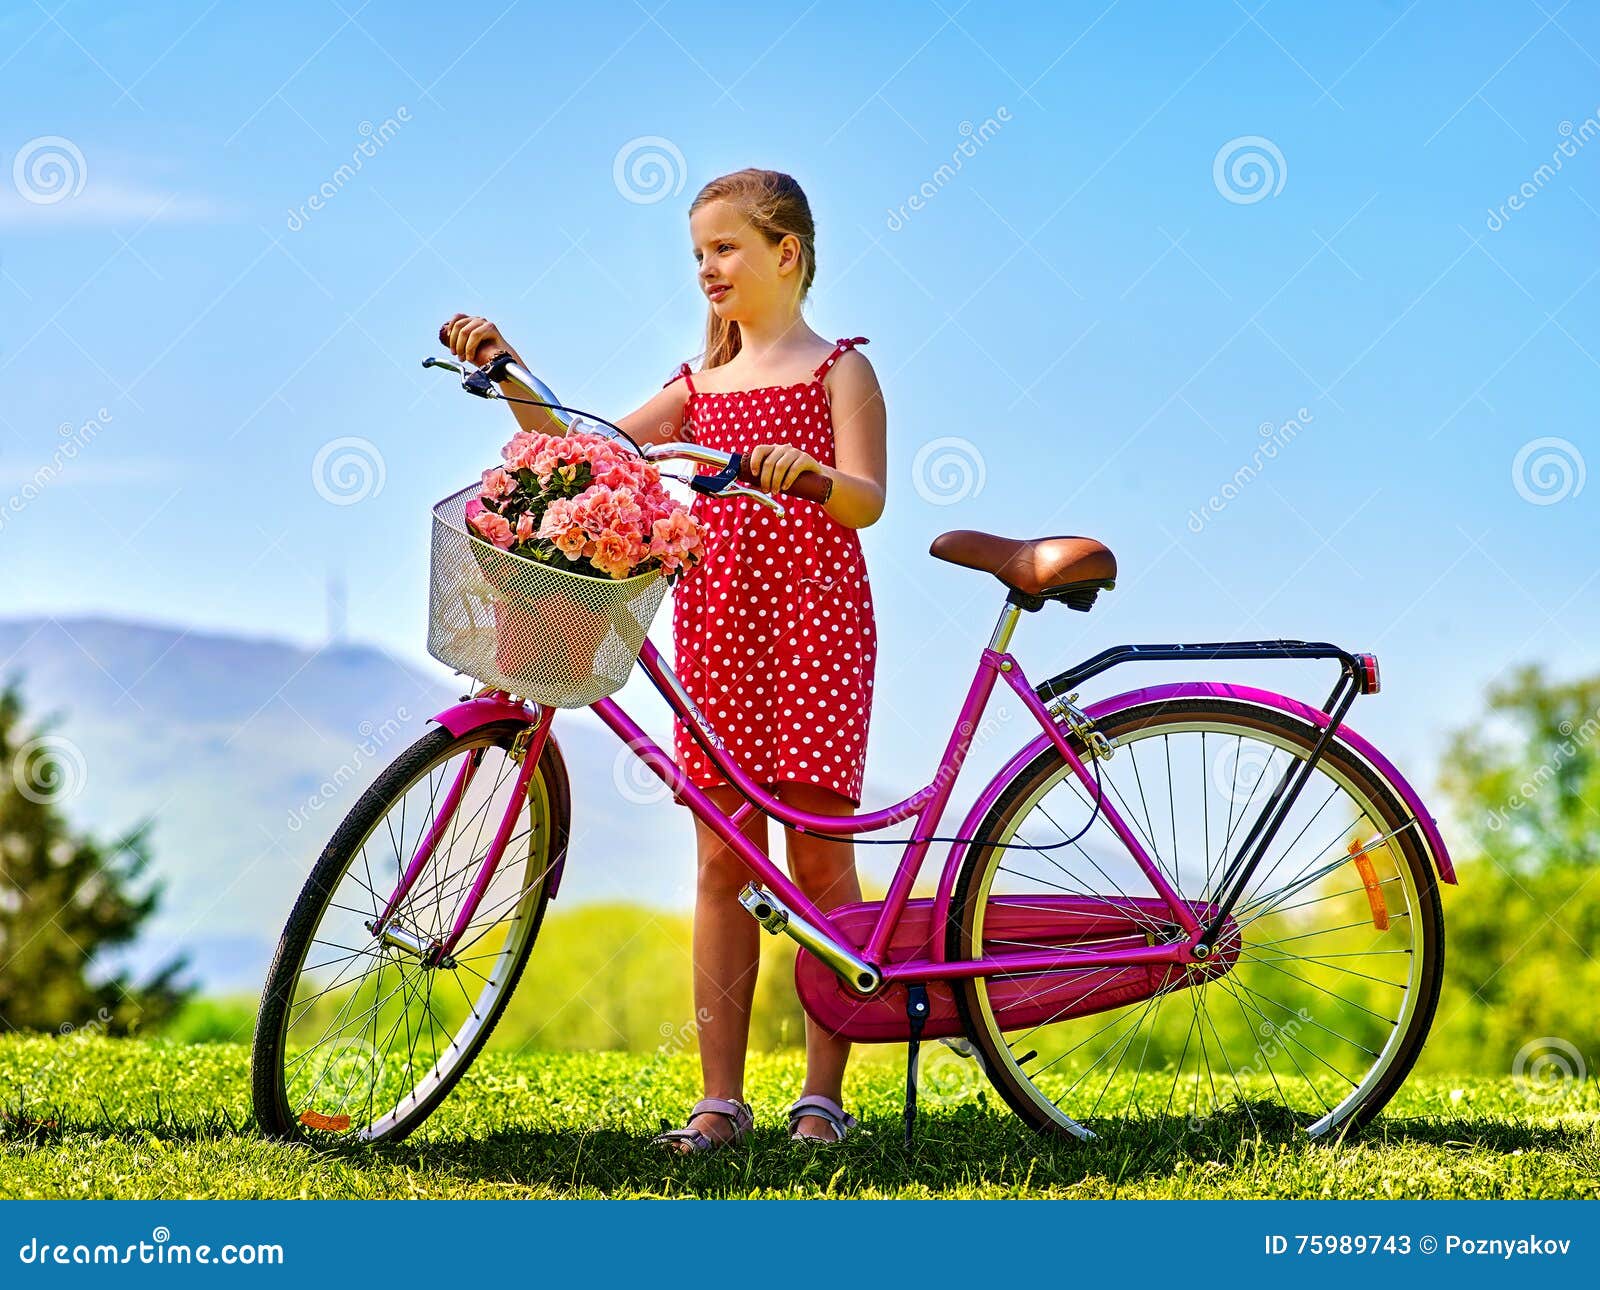 child girl wearing sundress rides bicycle into park.